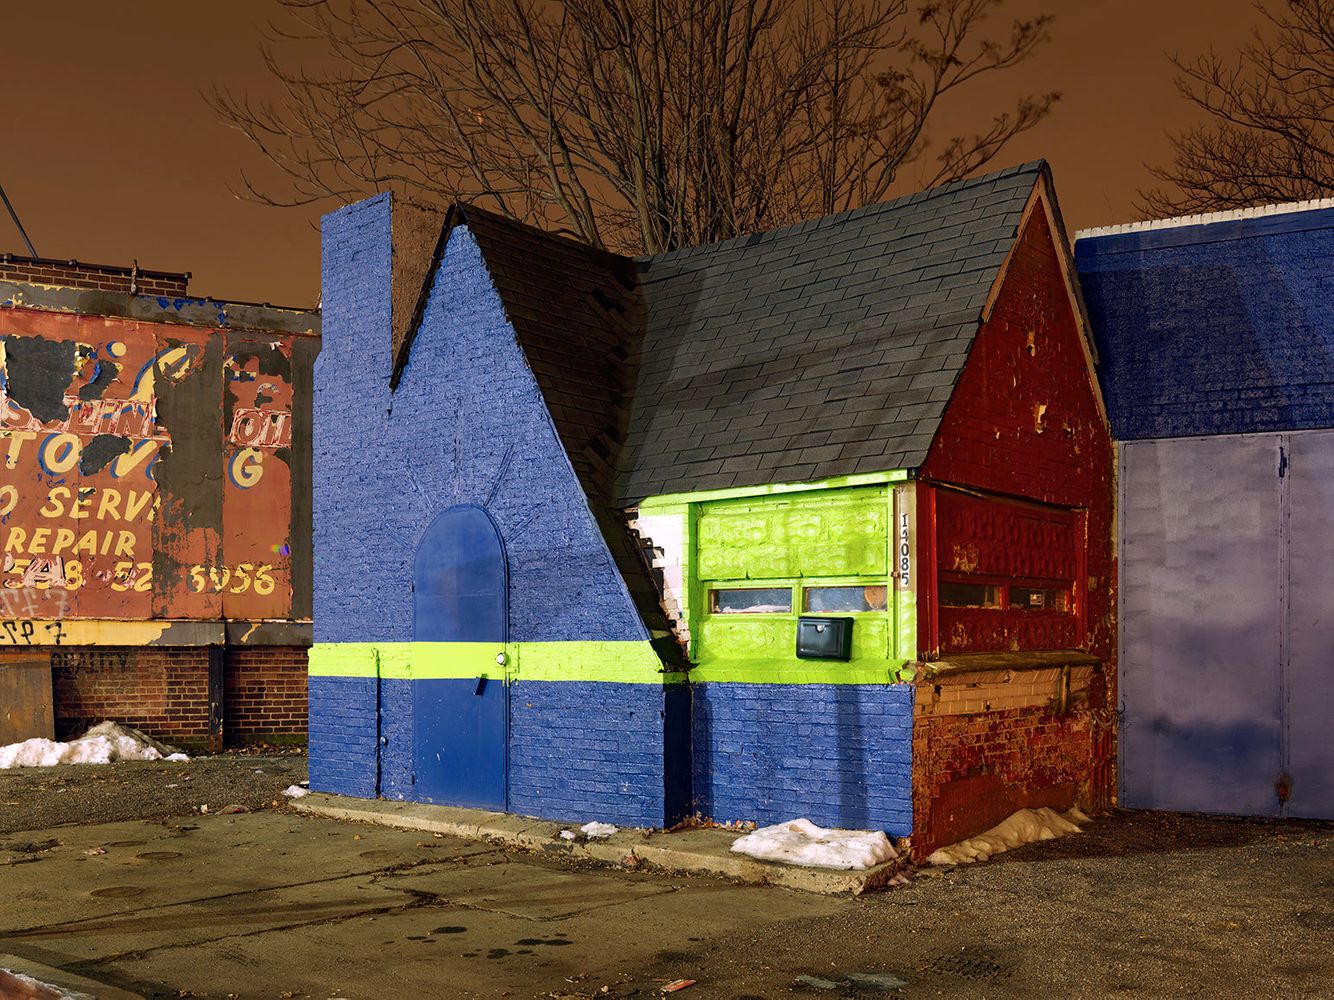 Tiny Building with New Mailbox, Gratiot Avenue, Eastside, Detroit 2016